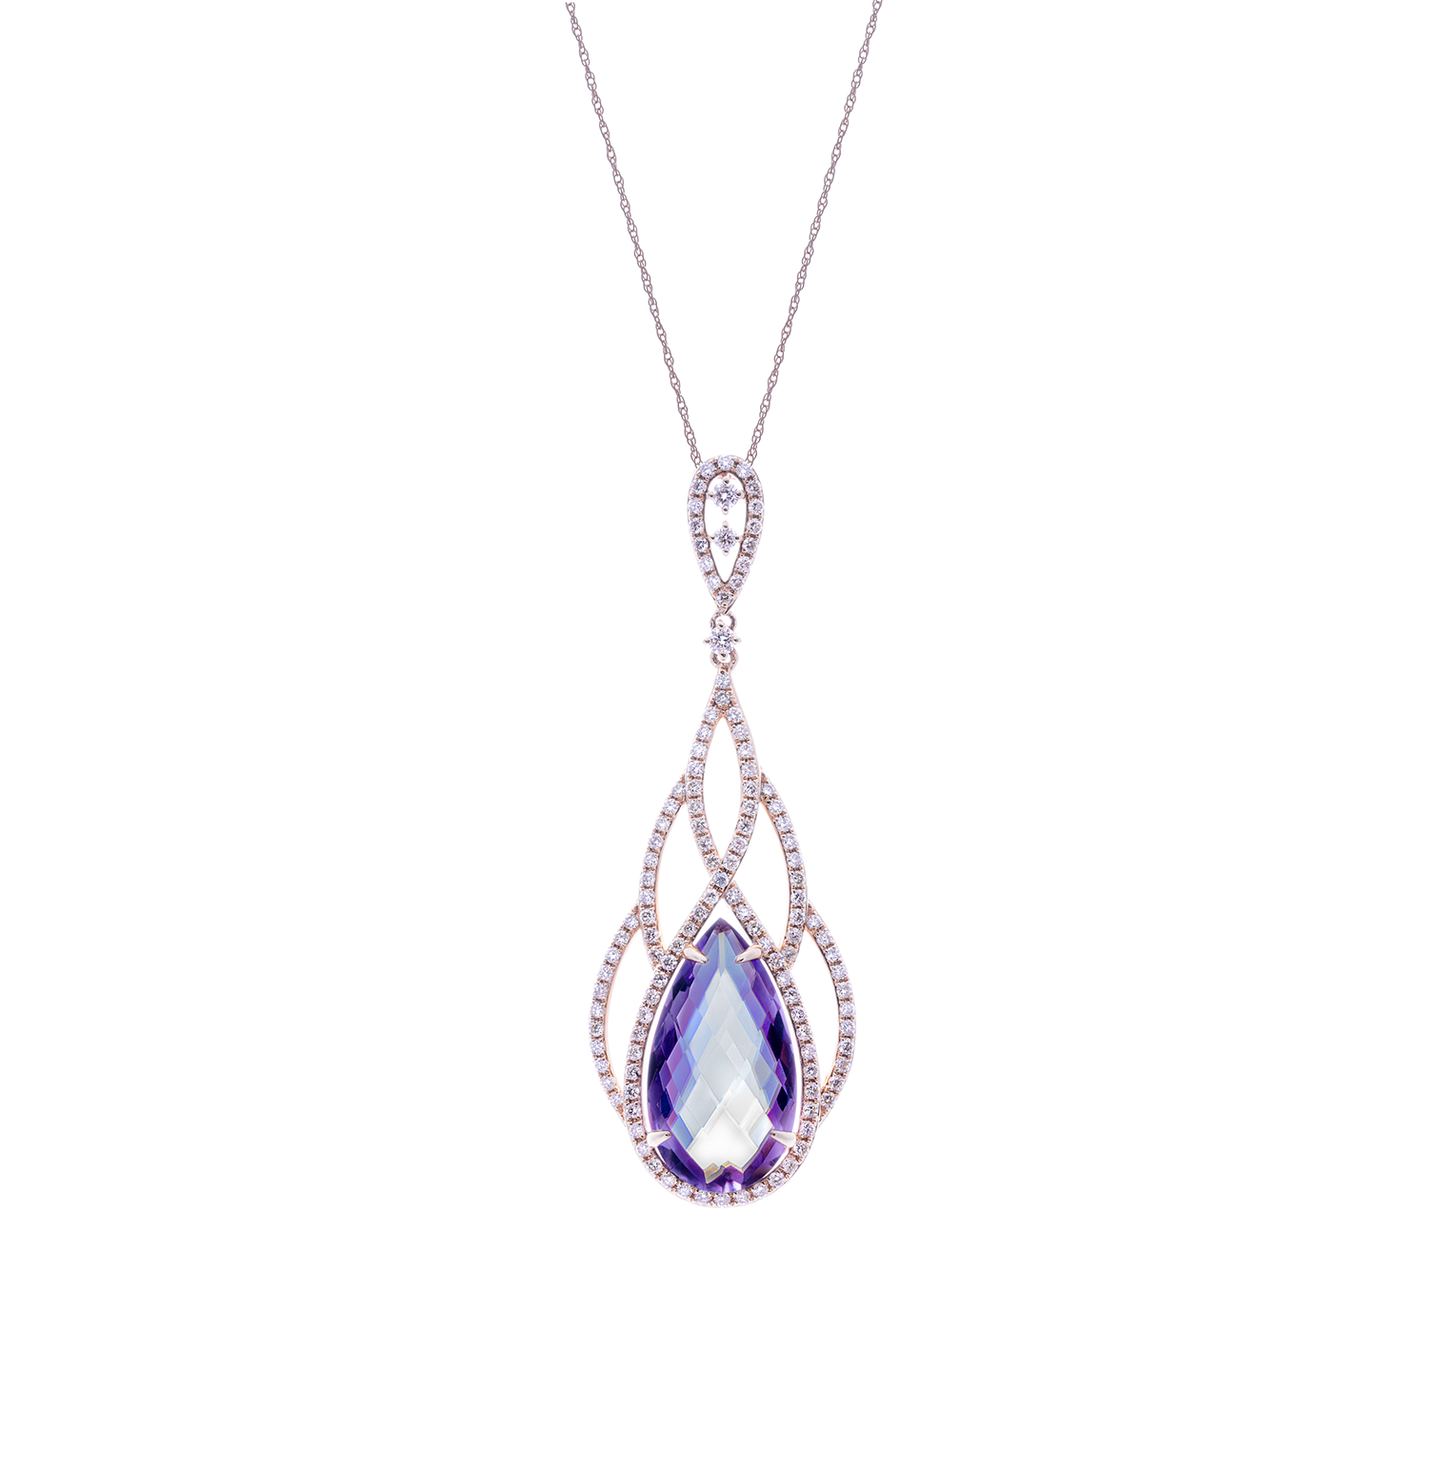 Sabel Collection Rose Gold Amethyst Pendant Necklace with Diamonds